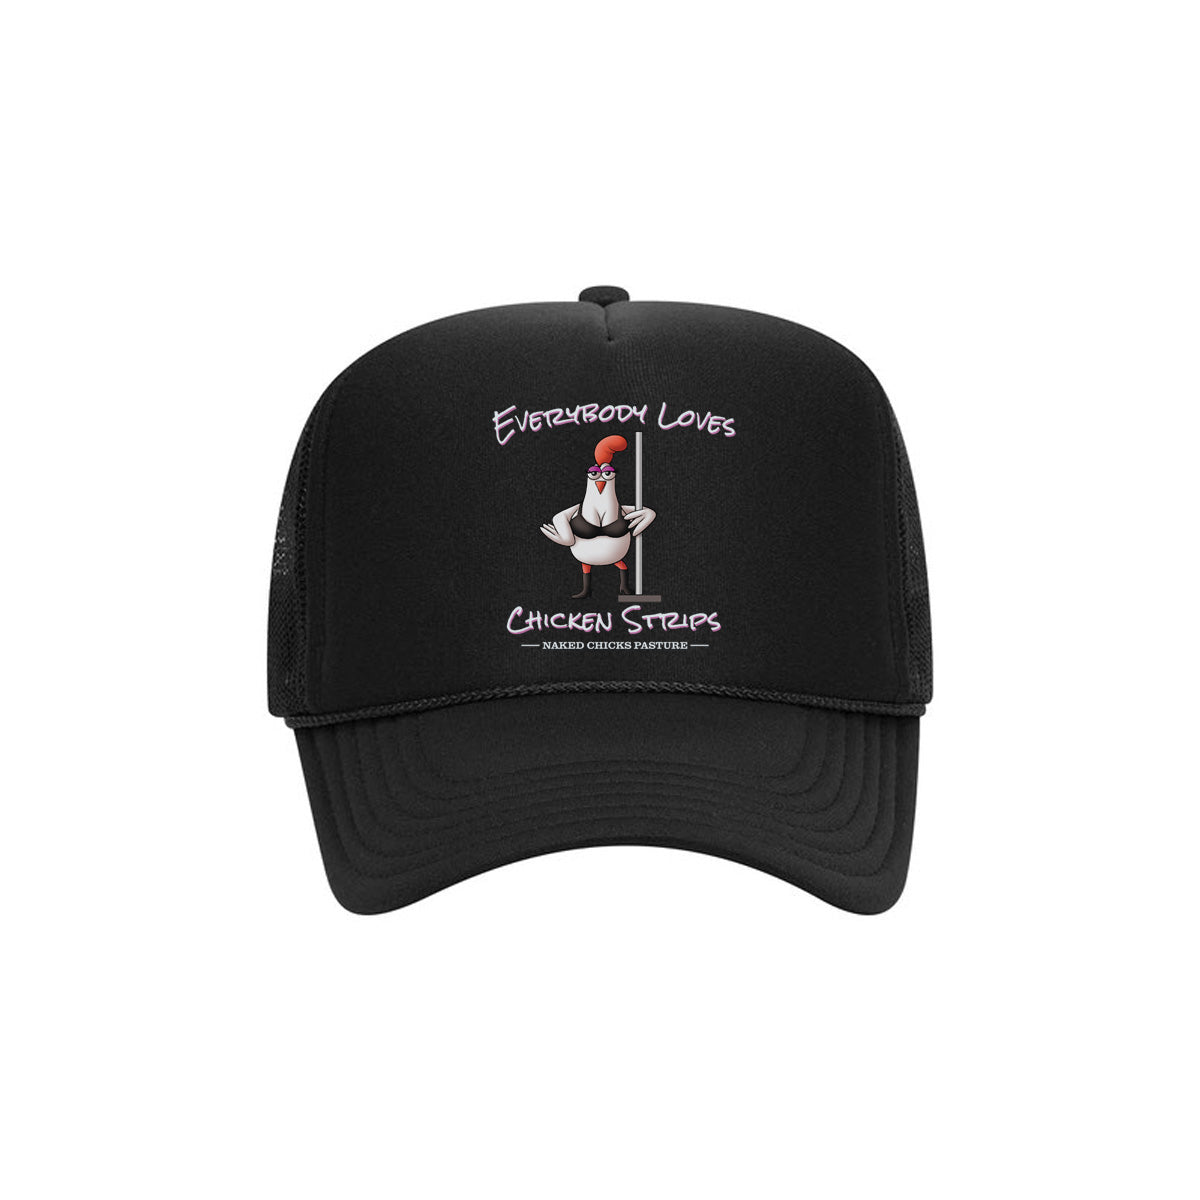 Everybody Loves Chicken Strips Hat – Naked Chicks Pasture